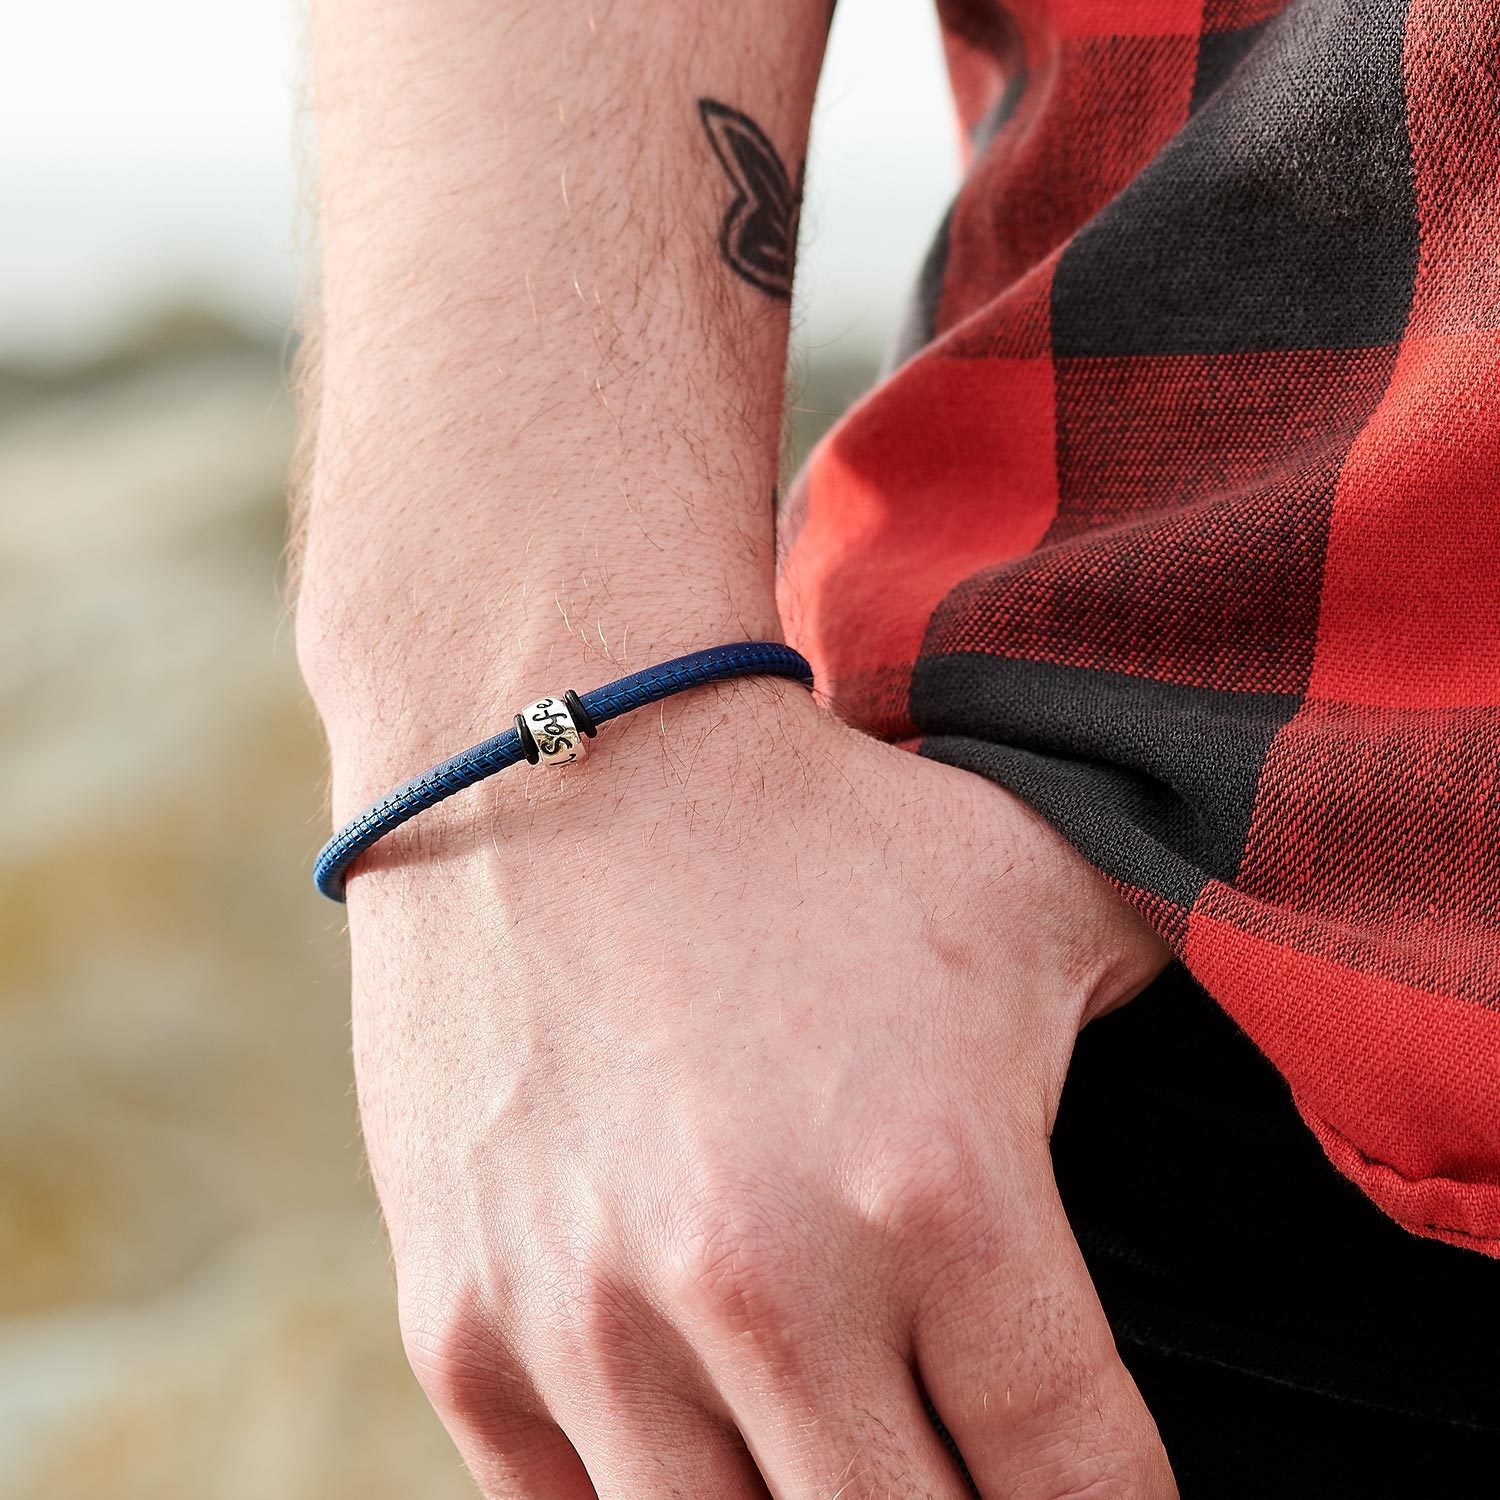 Travel Safe Silver & Italian Stitched Leather Bracelet - alternative travel gift from Off The map Brighton